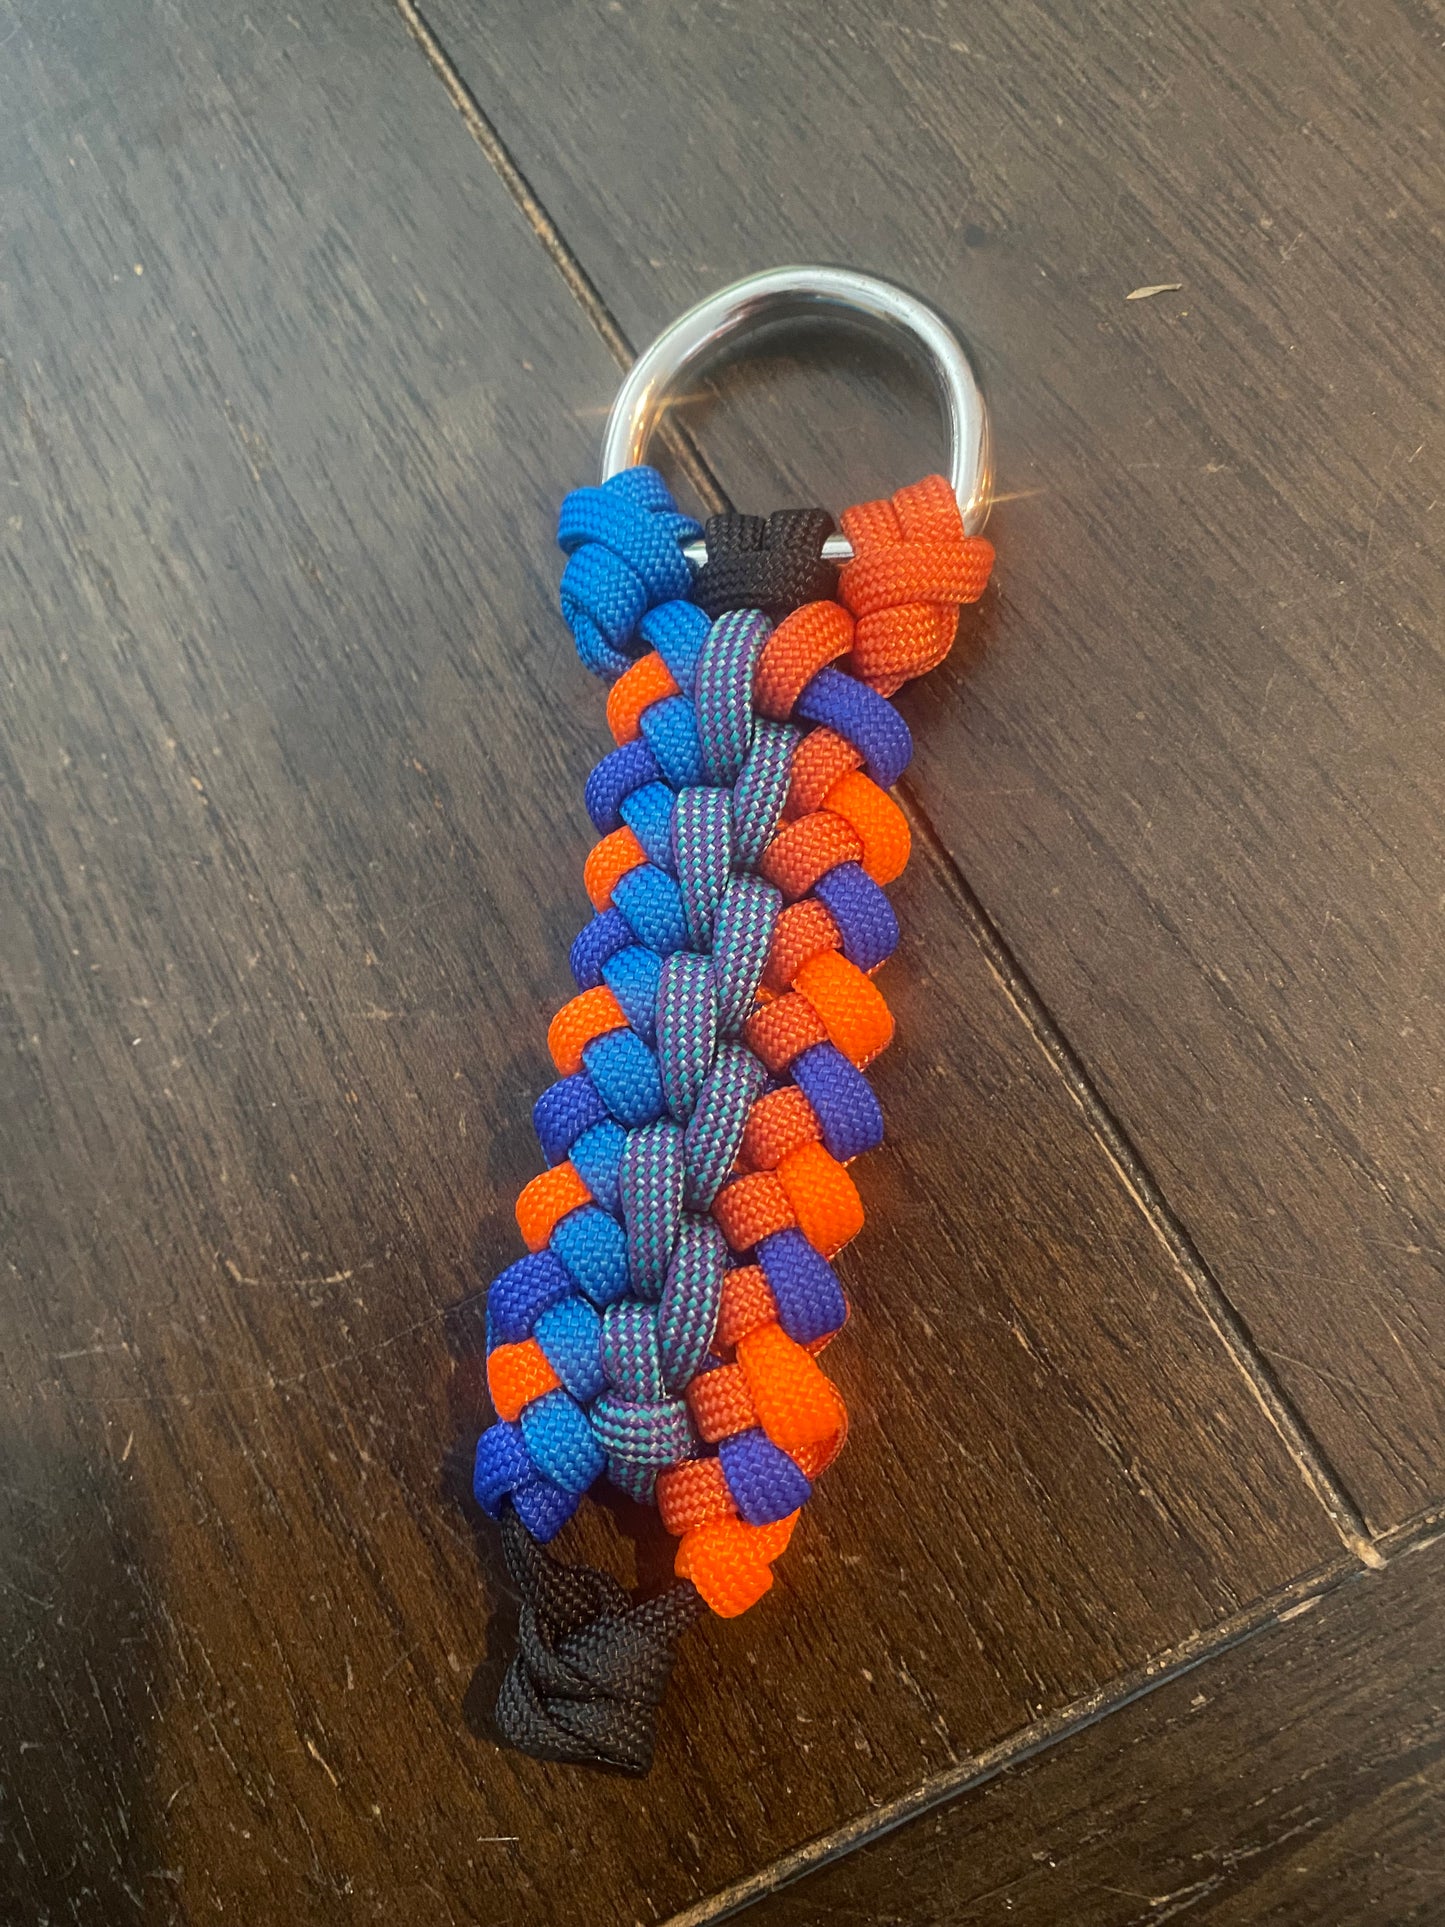 Custom Paracord Sanctified Keychain, Choose your Weave Subtype, Colors, and Hardware